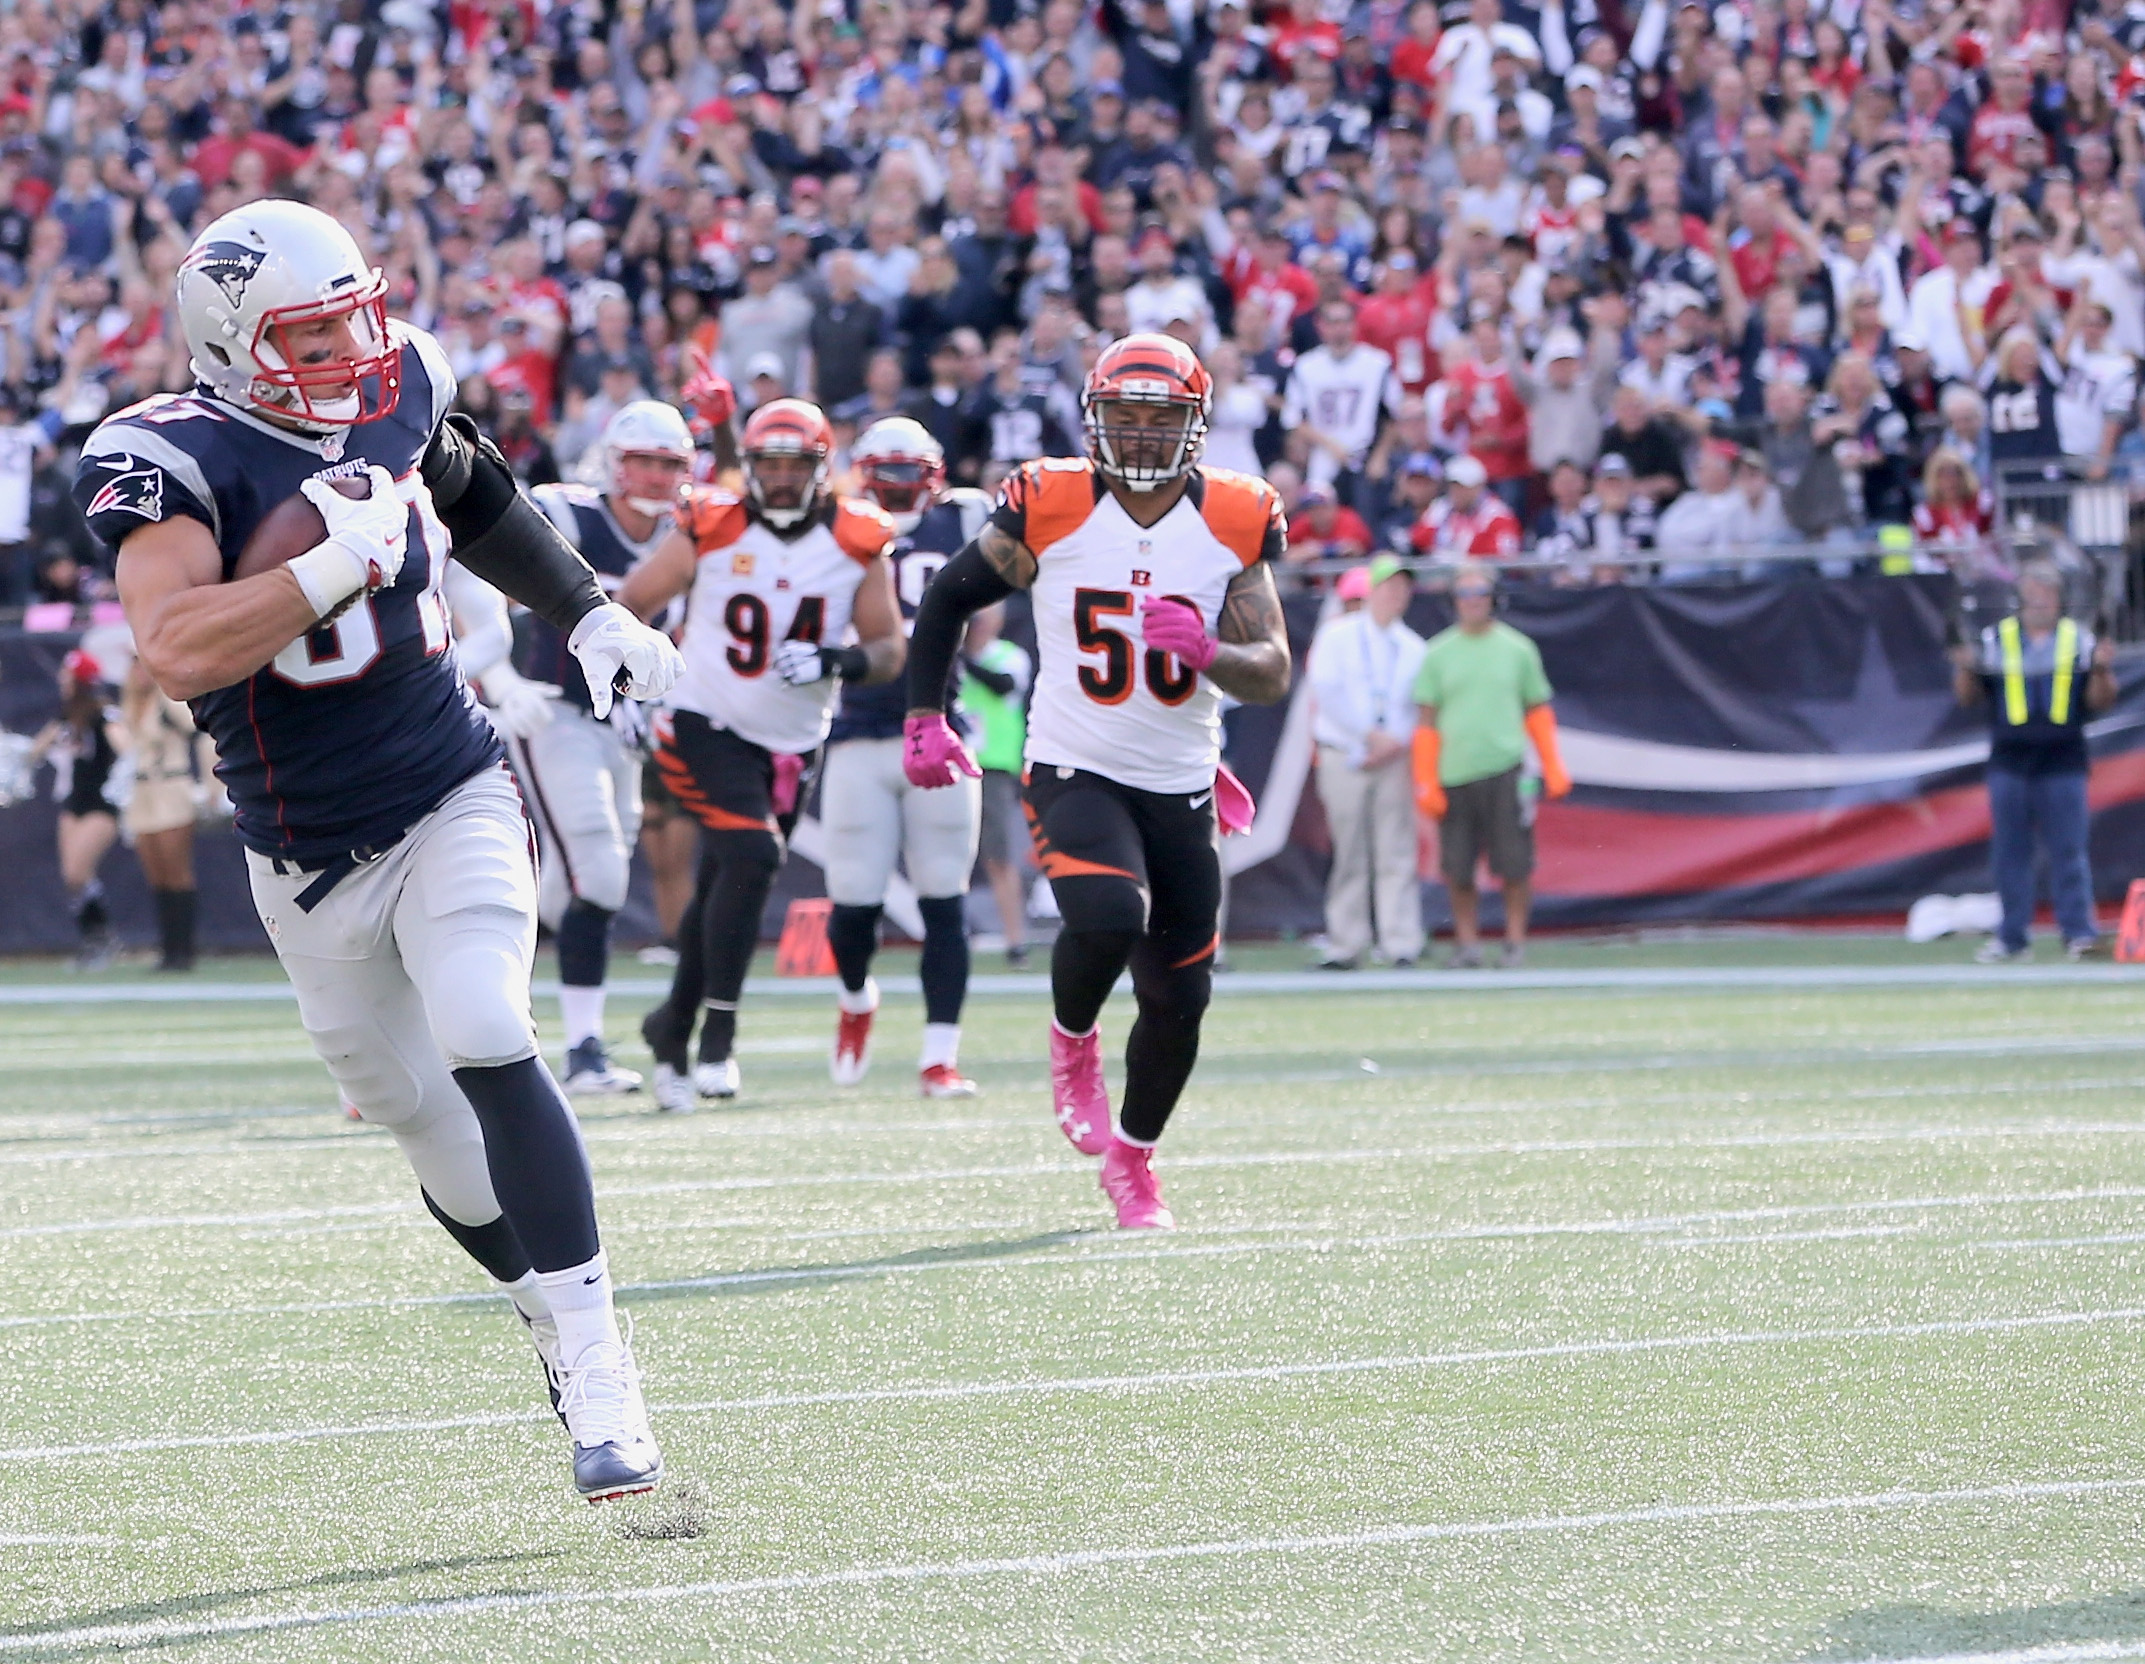 Rob Gronkowski makes a catch against the Cincinnati Bengals. (Photo by Jim Rogash/Getty Images)